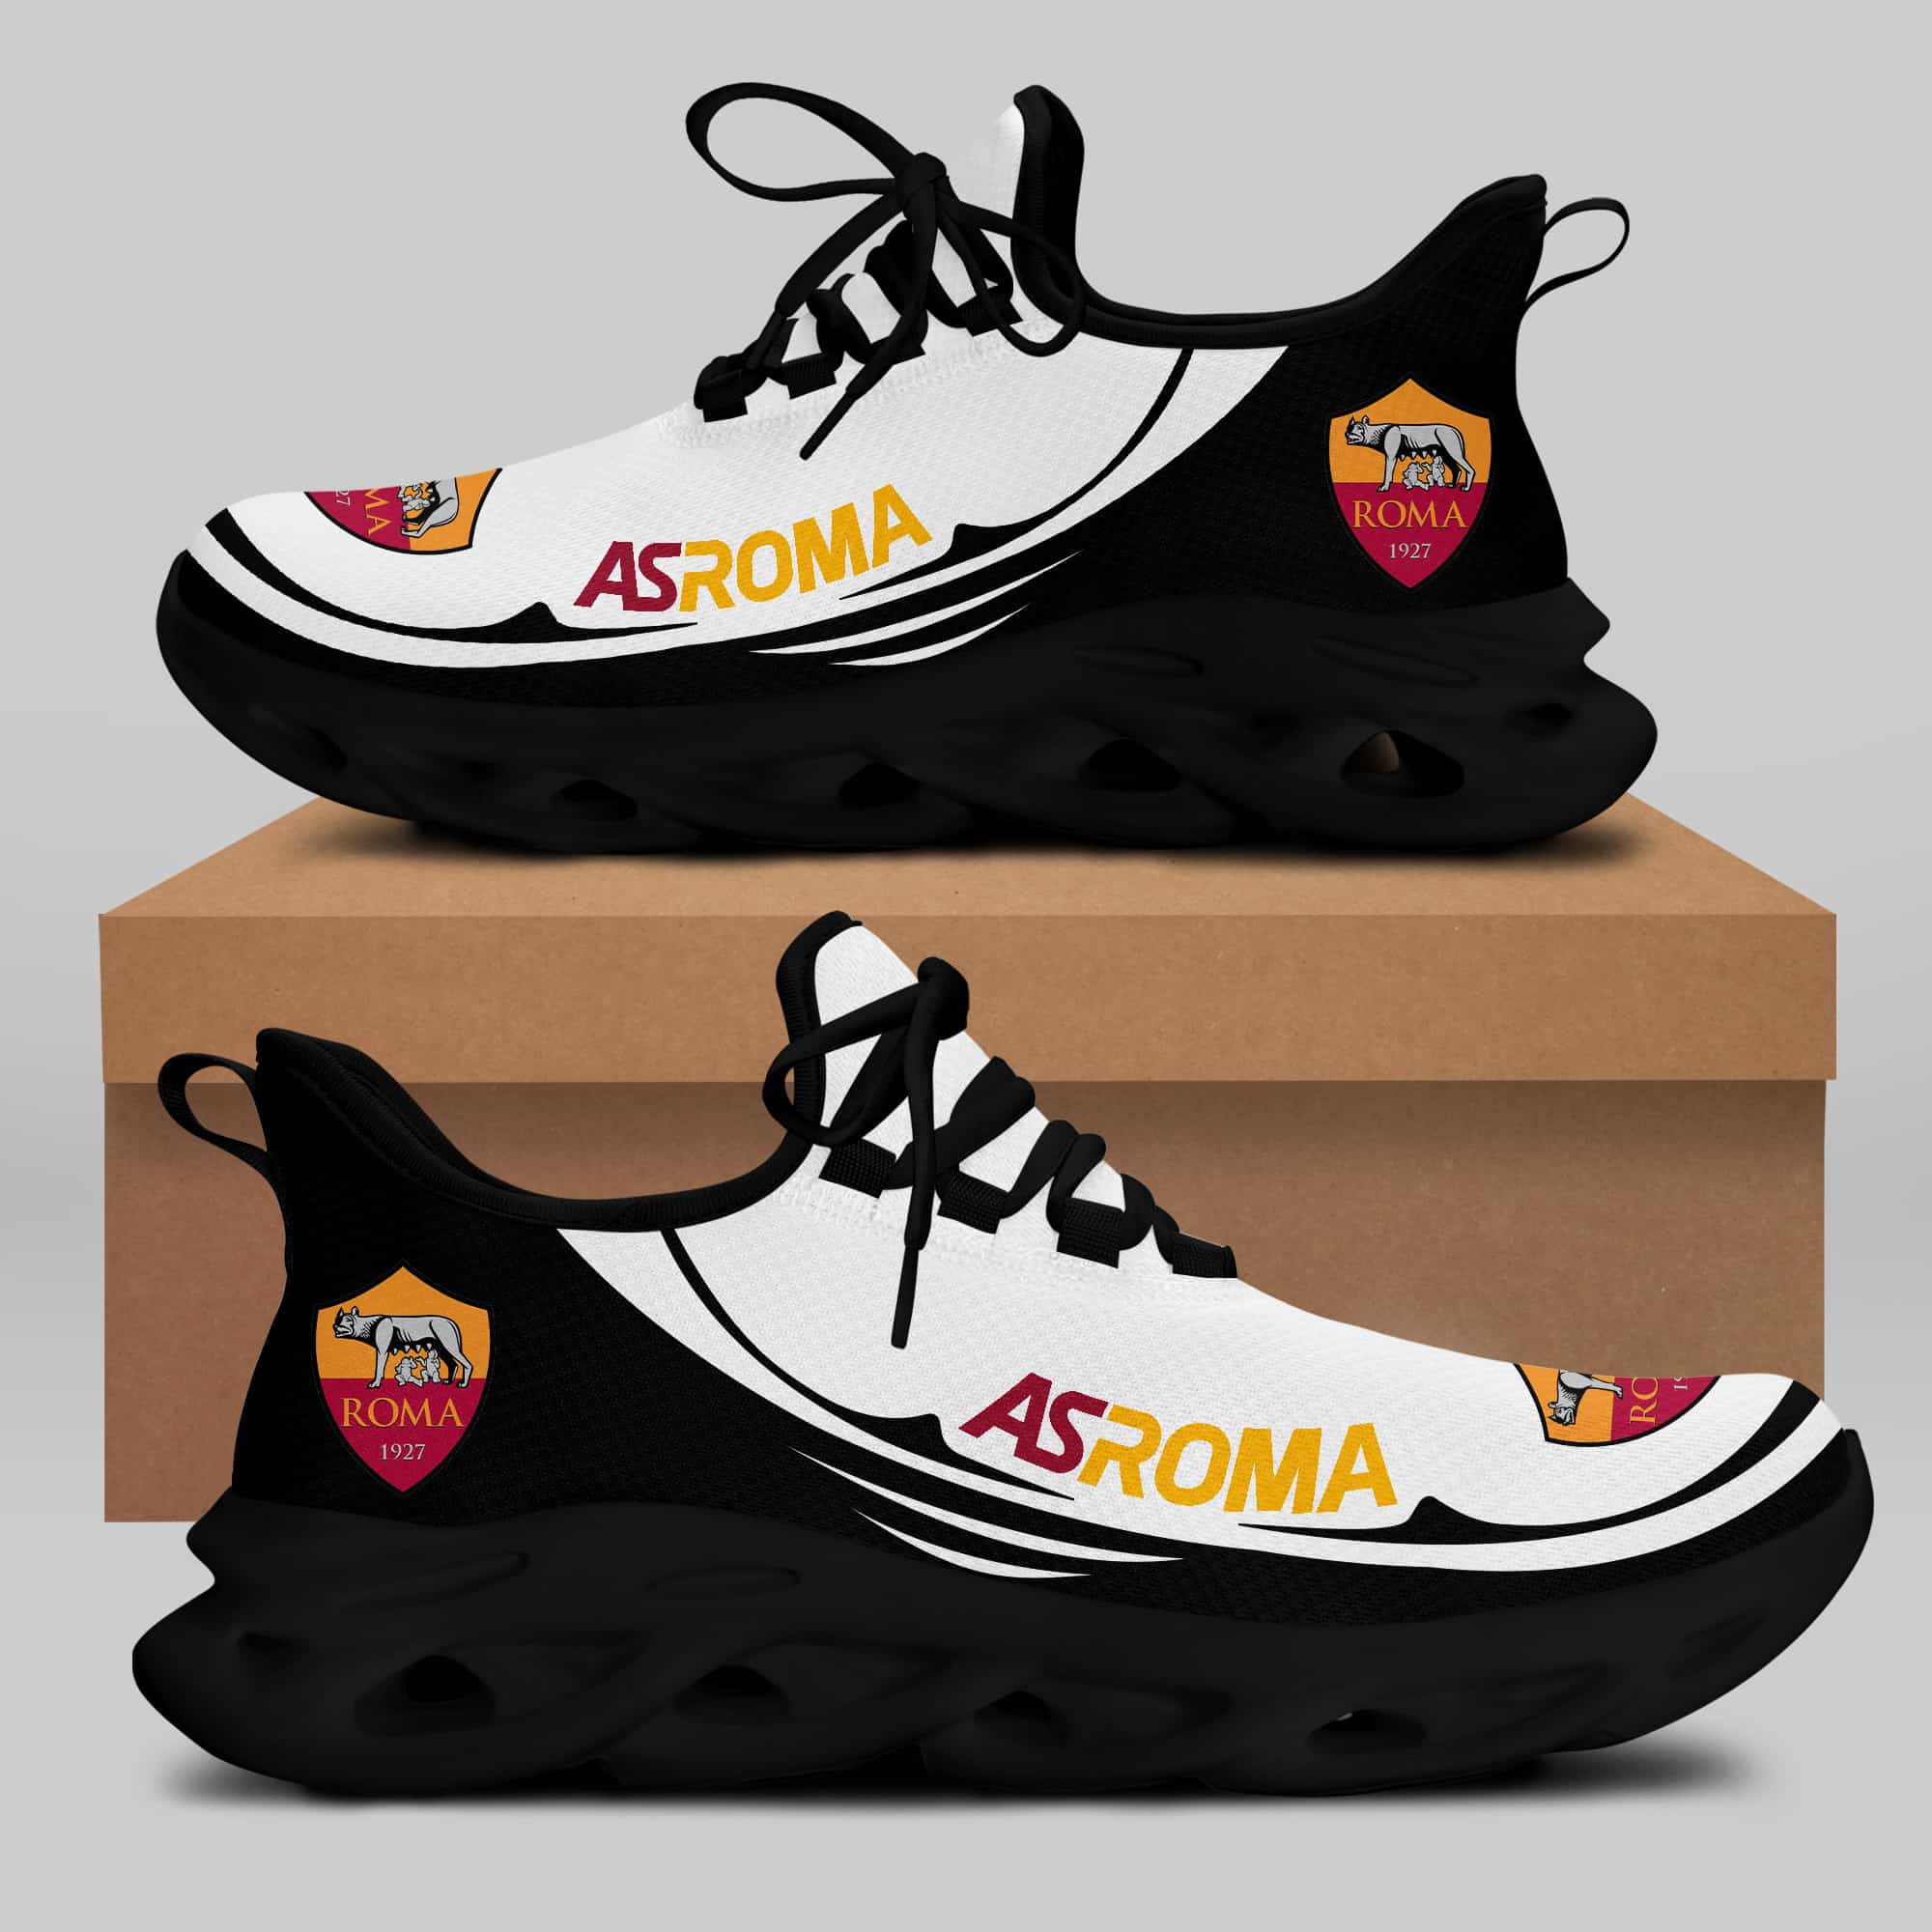 As Roma Running Shoes Max Soul Shoes Sneakers Ver 31 2